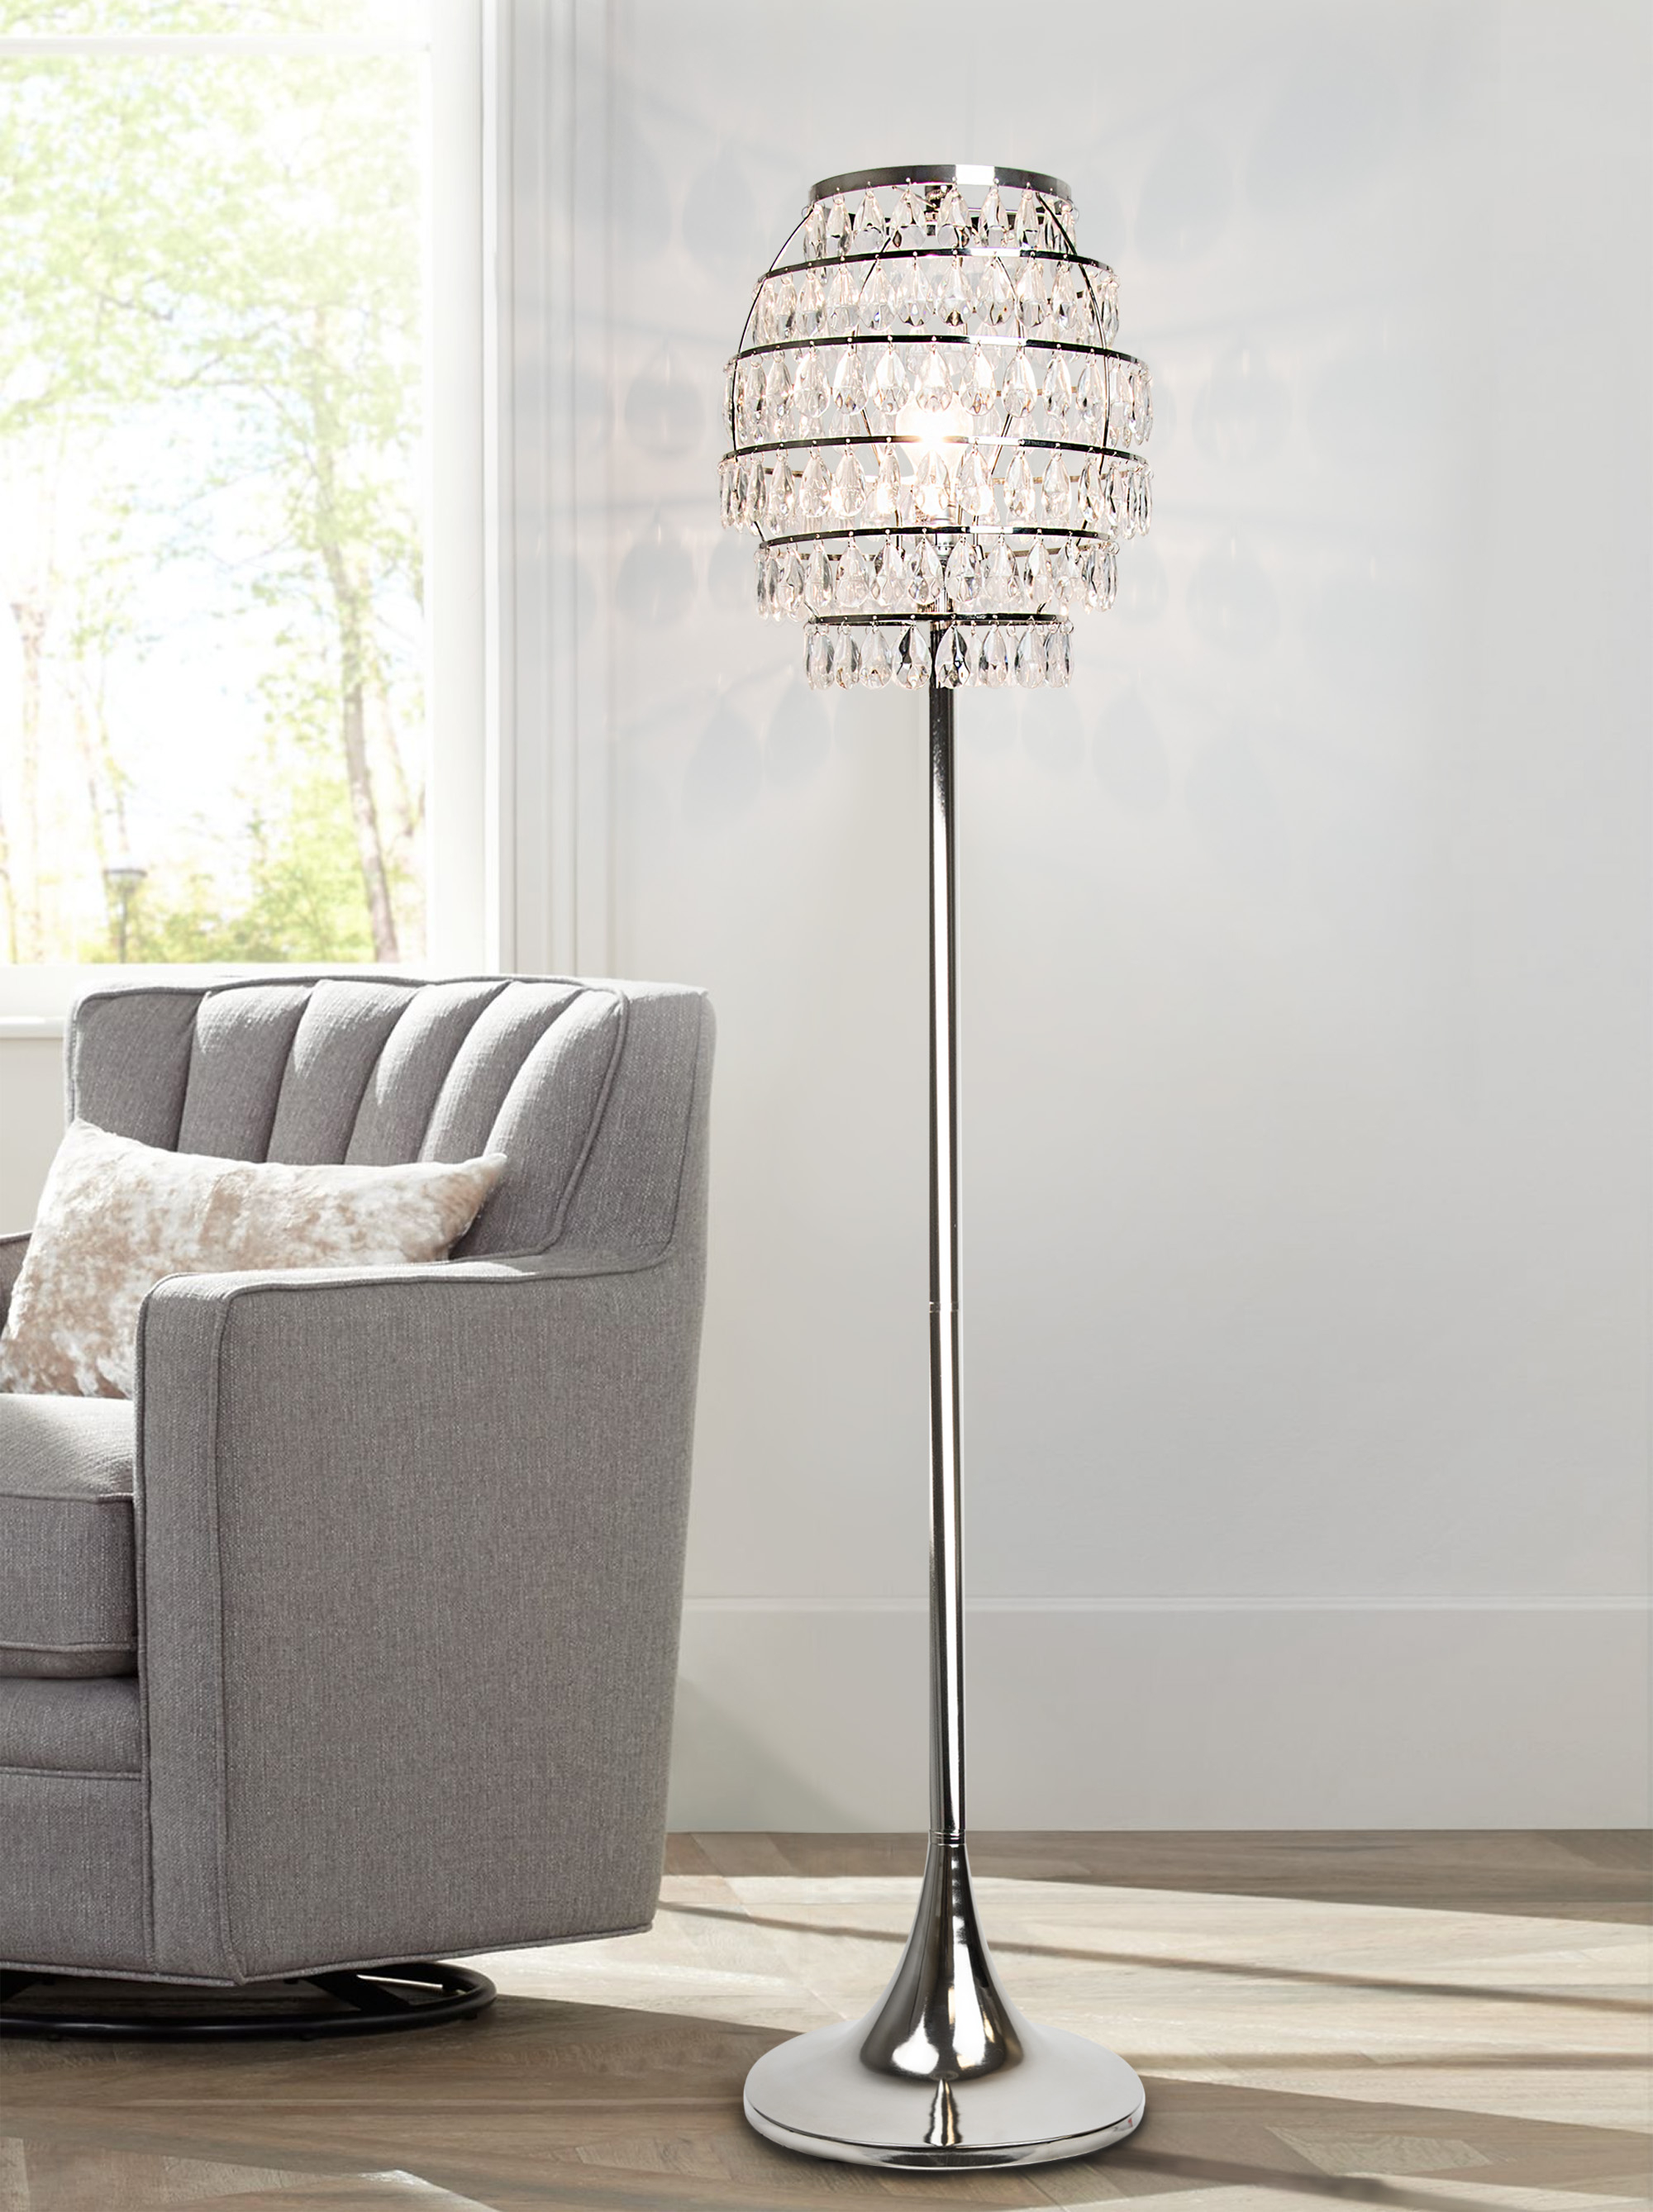 Details About Grandview Gallery 6325 Polished Nickel Modern Bling Floor Lamp 6 Tier Shade regarding size 2000 X 2677